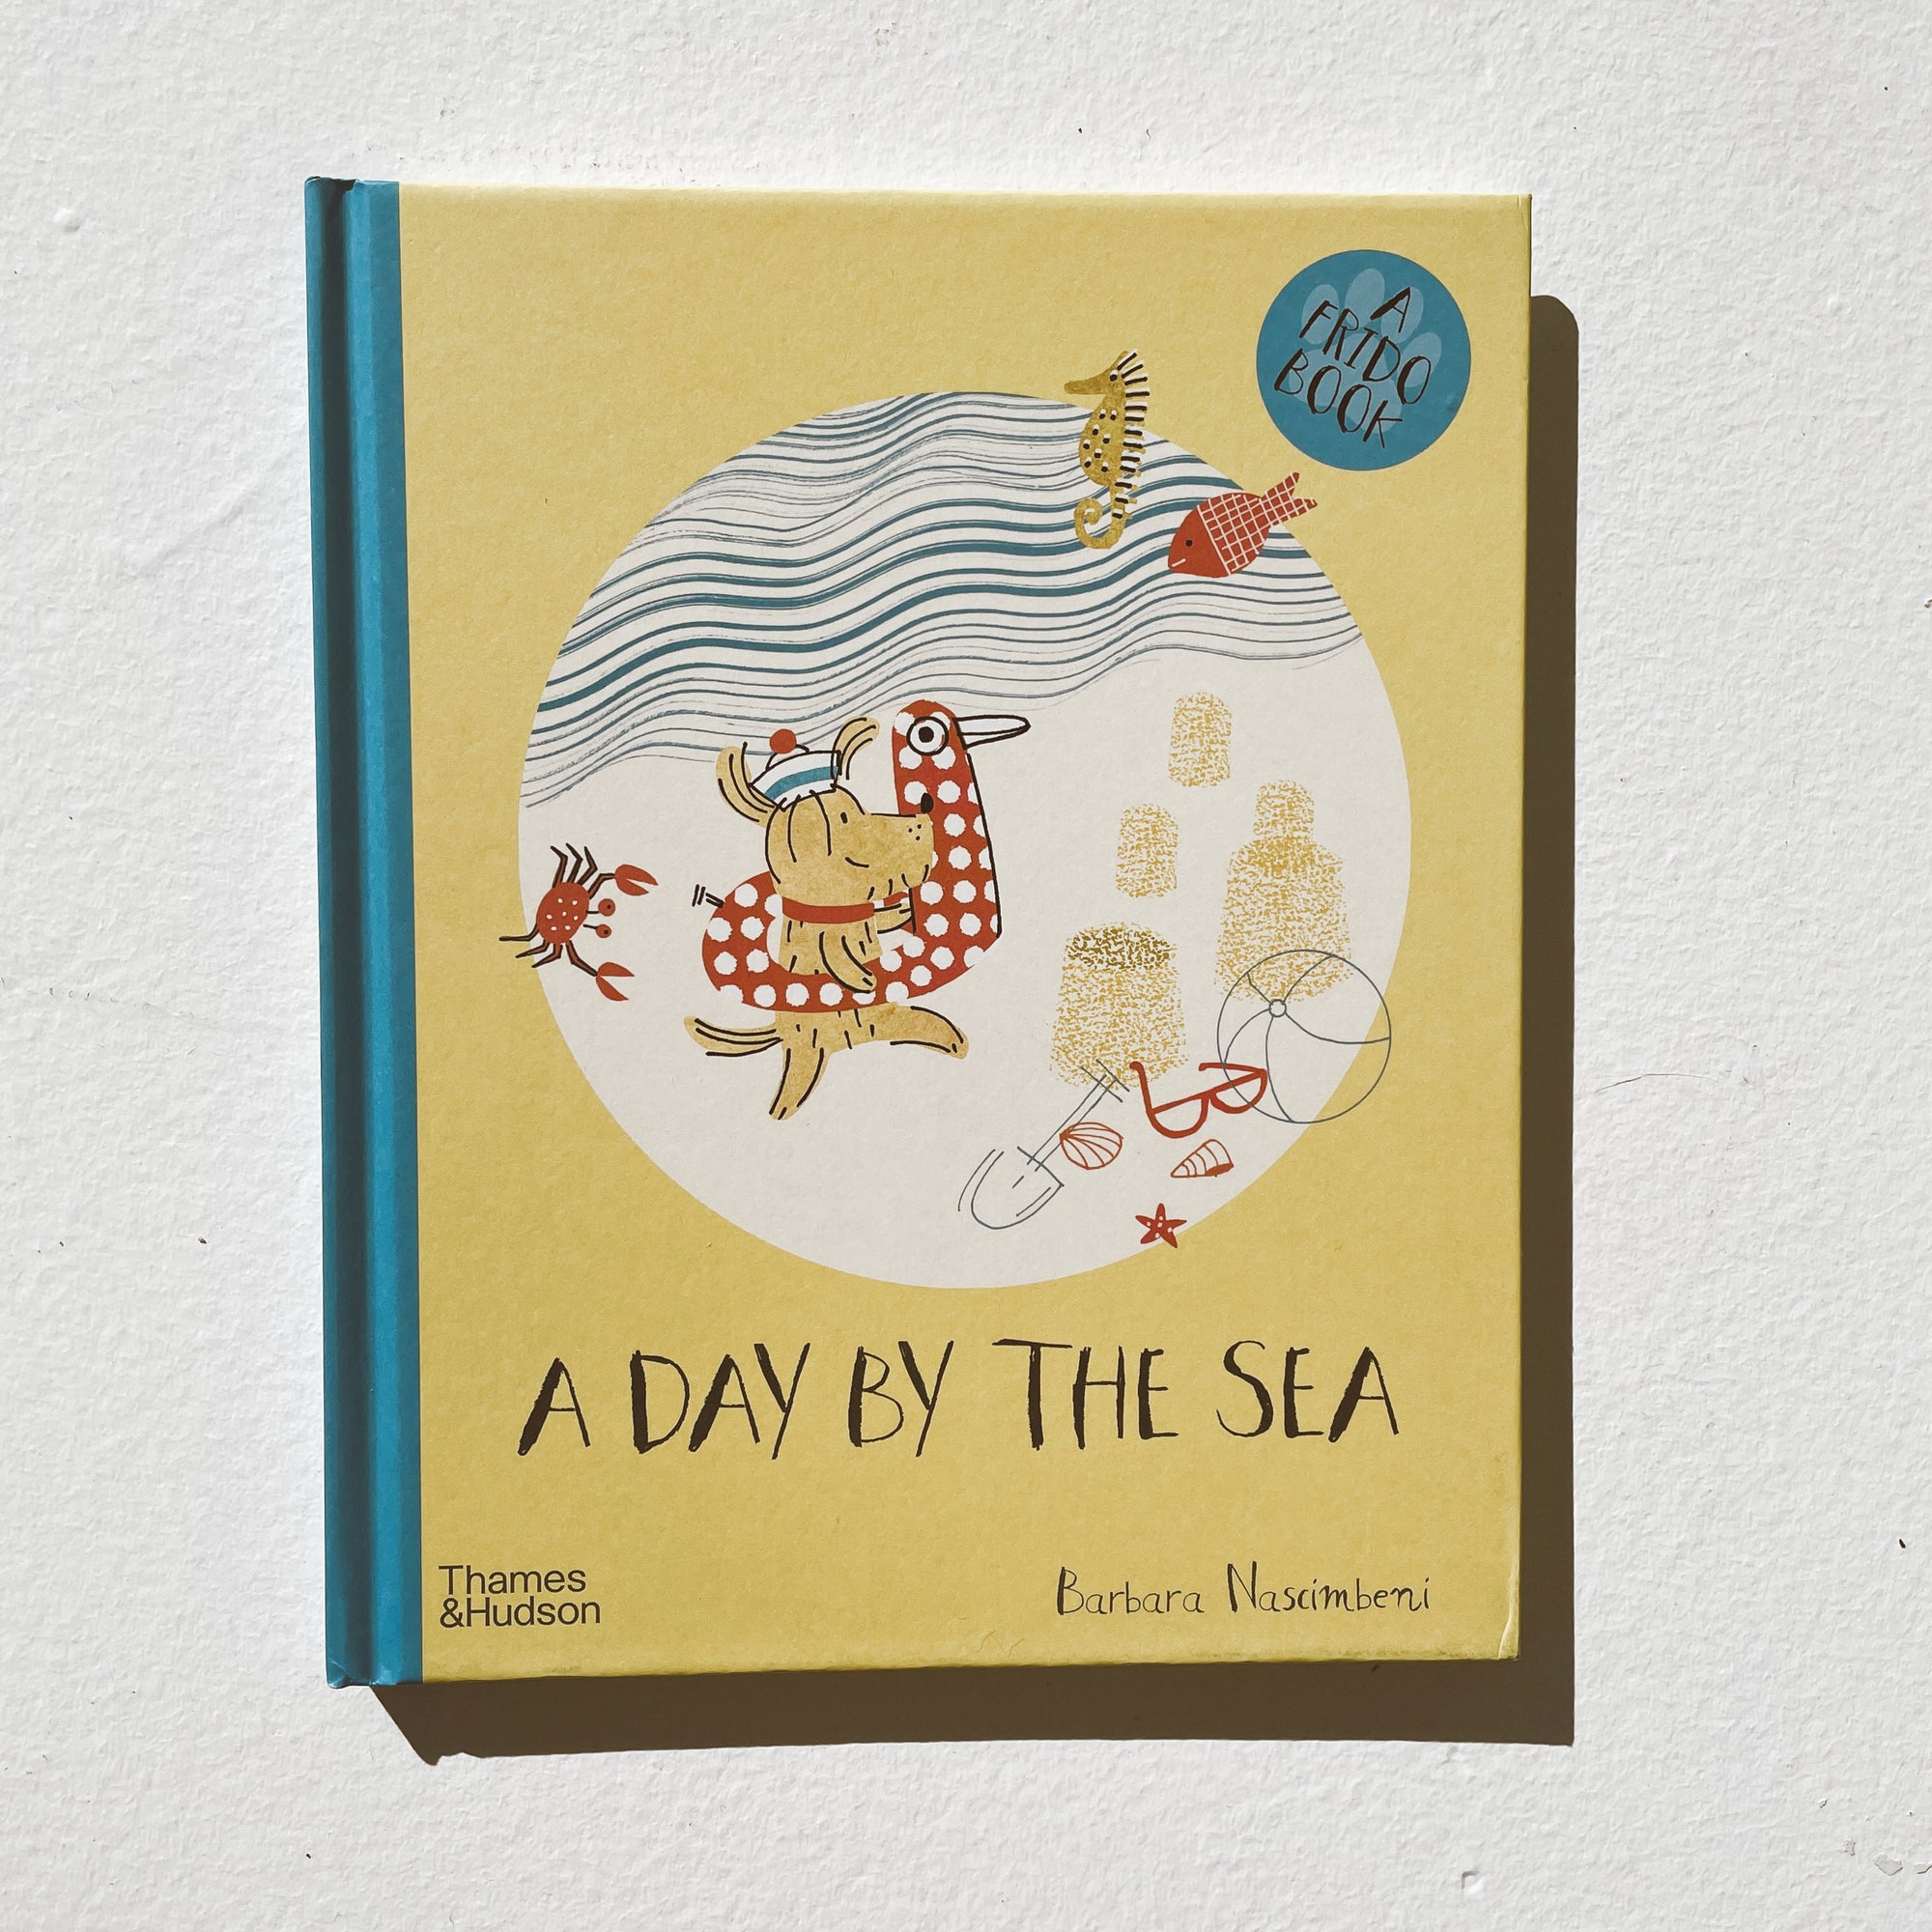 A DAY BY THE SEA